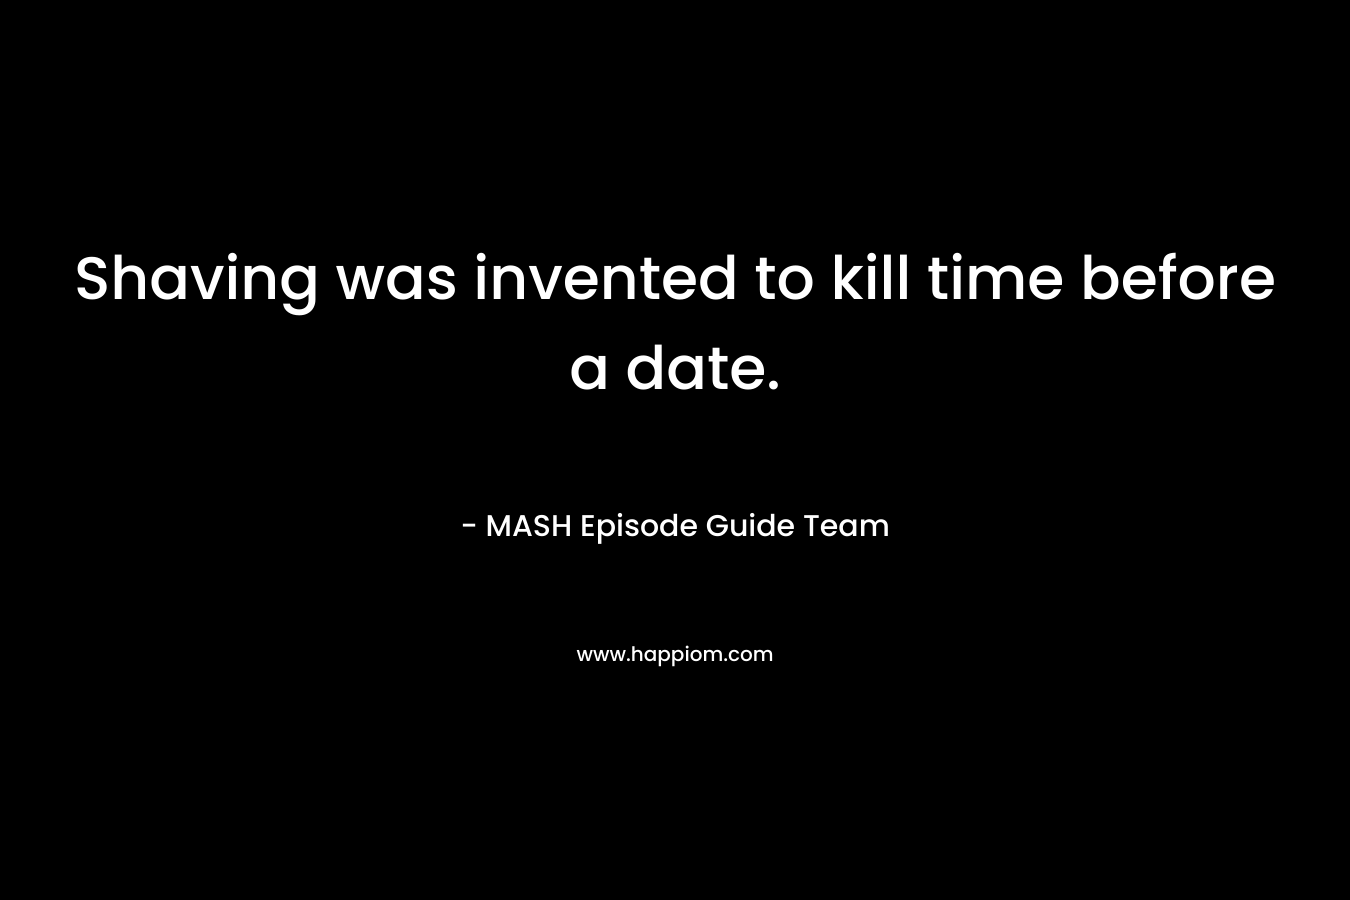 Shaving was invented to kill time before a date. – MASH Episode Guide Team